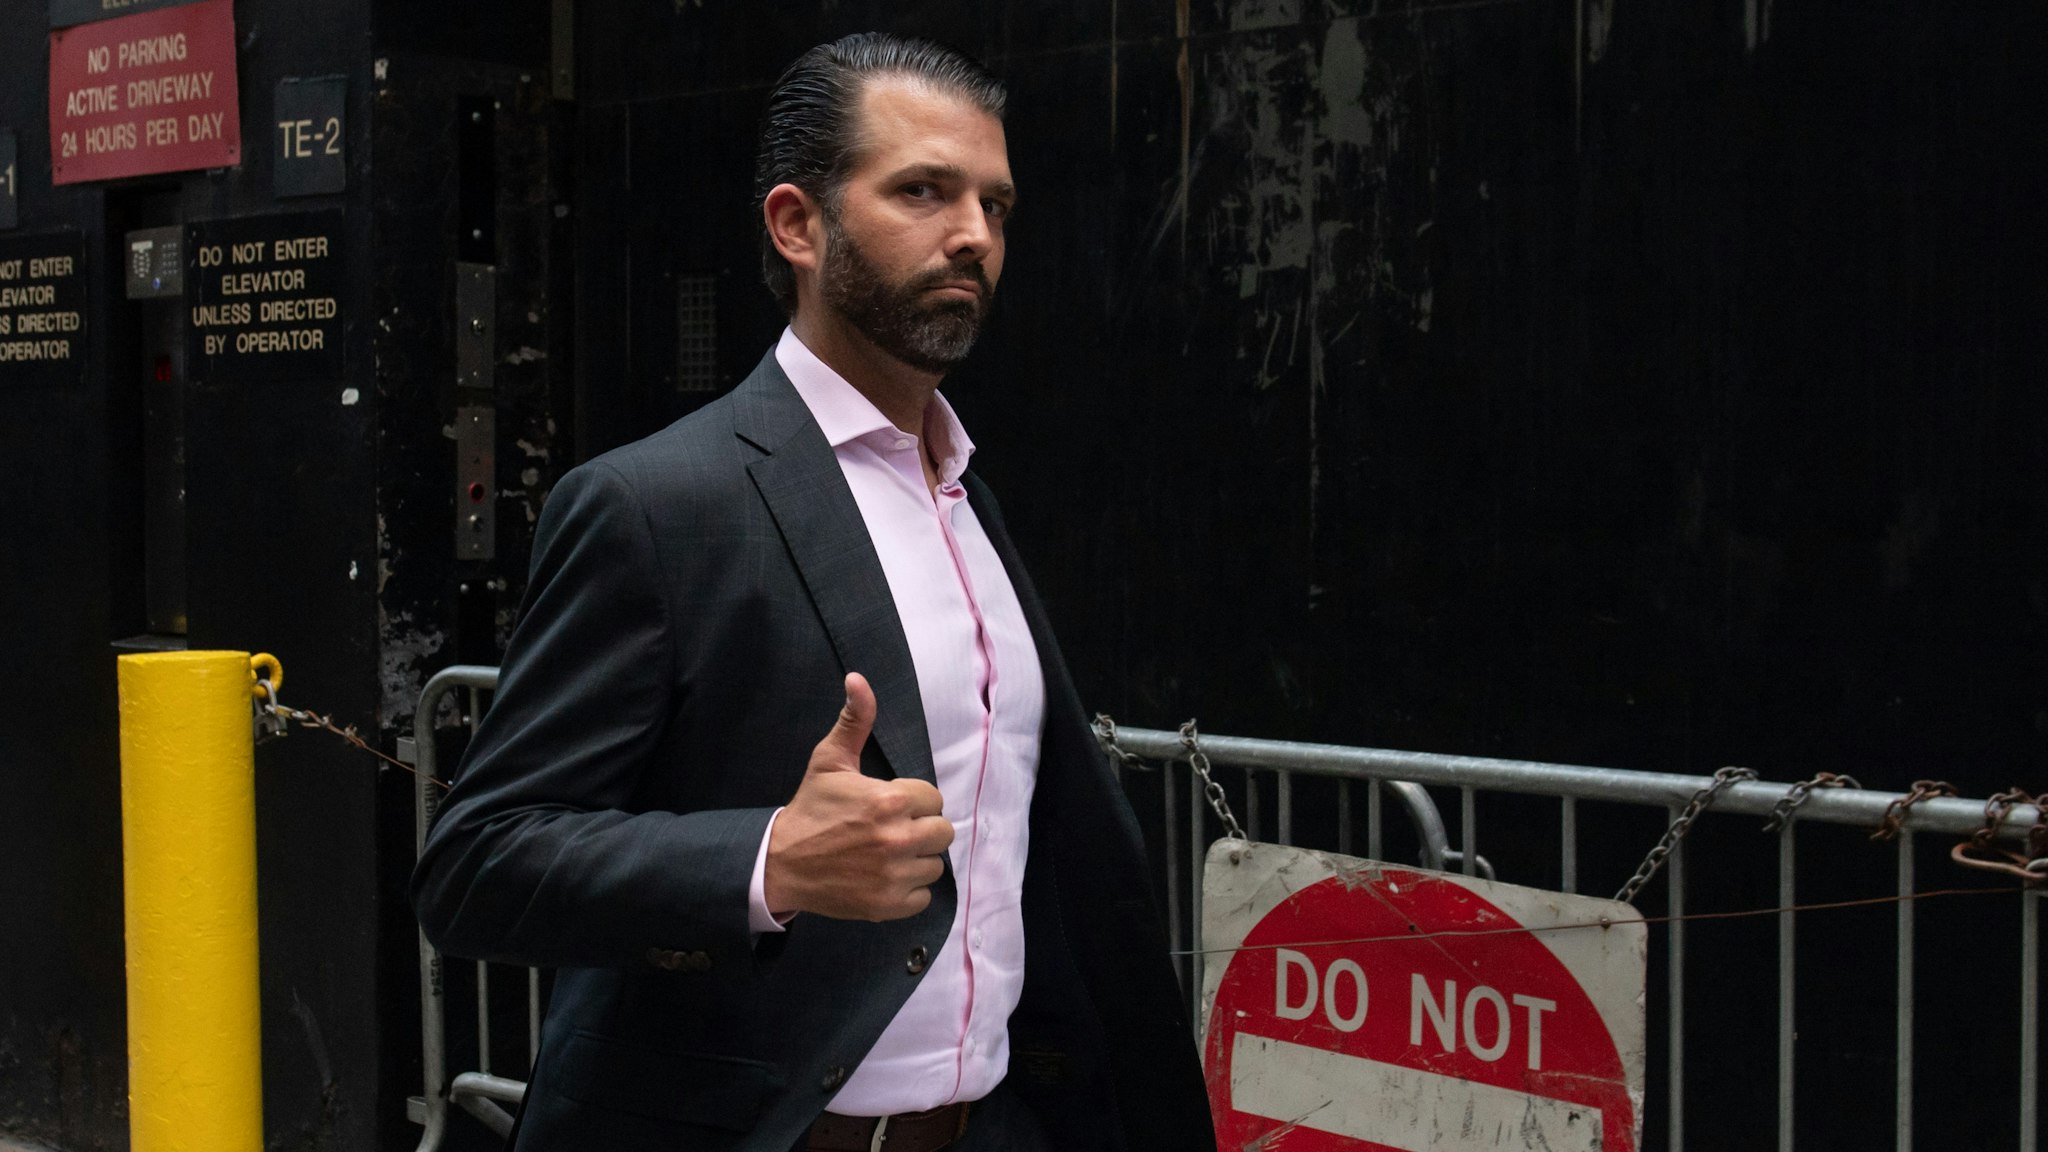 Donald Trump, Jr., son of US President Donald Trump, gives a thumbs-up as he walks outside of Trump Tower in New York, September 24, 2019.